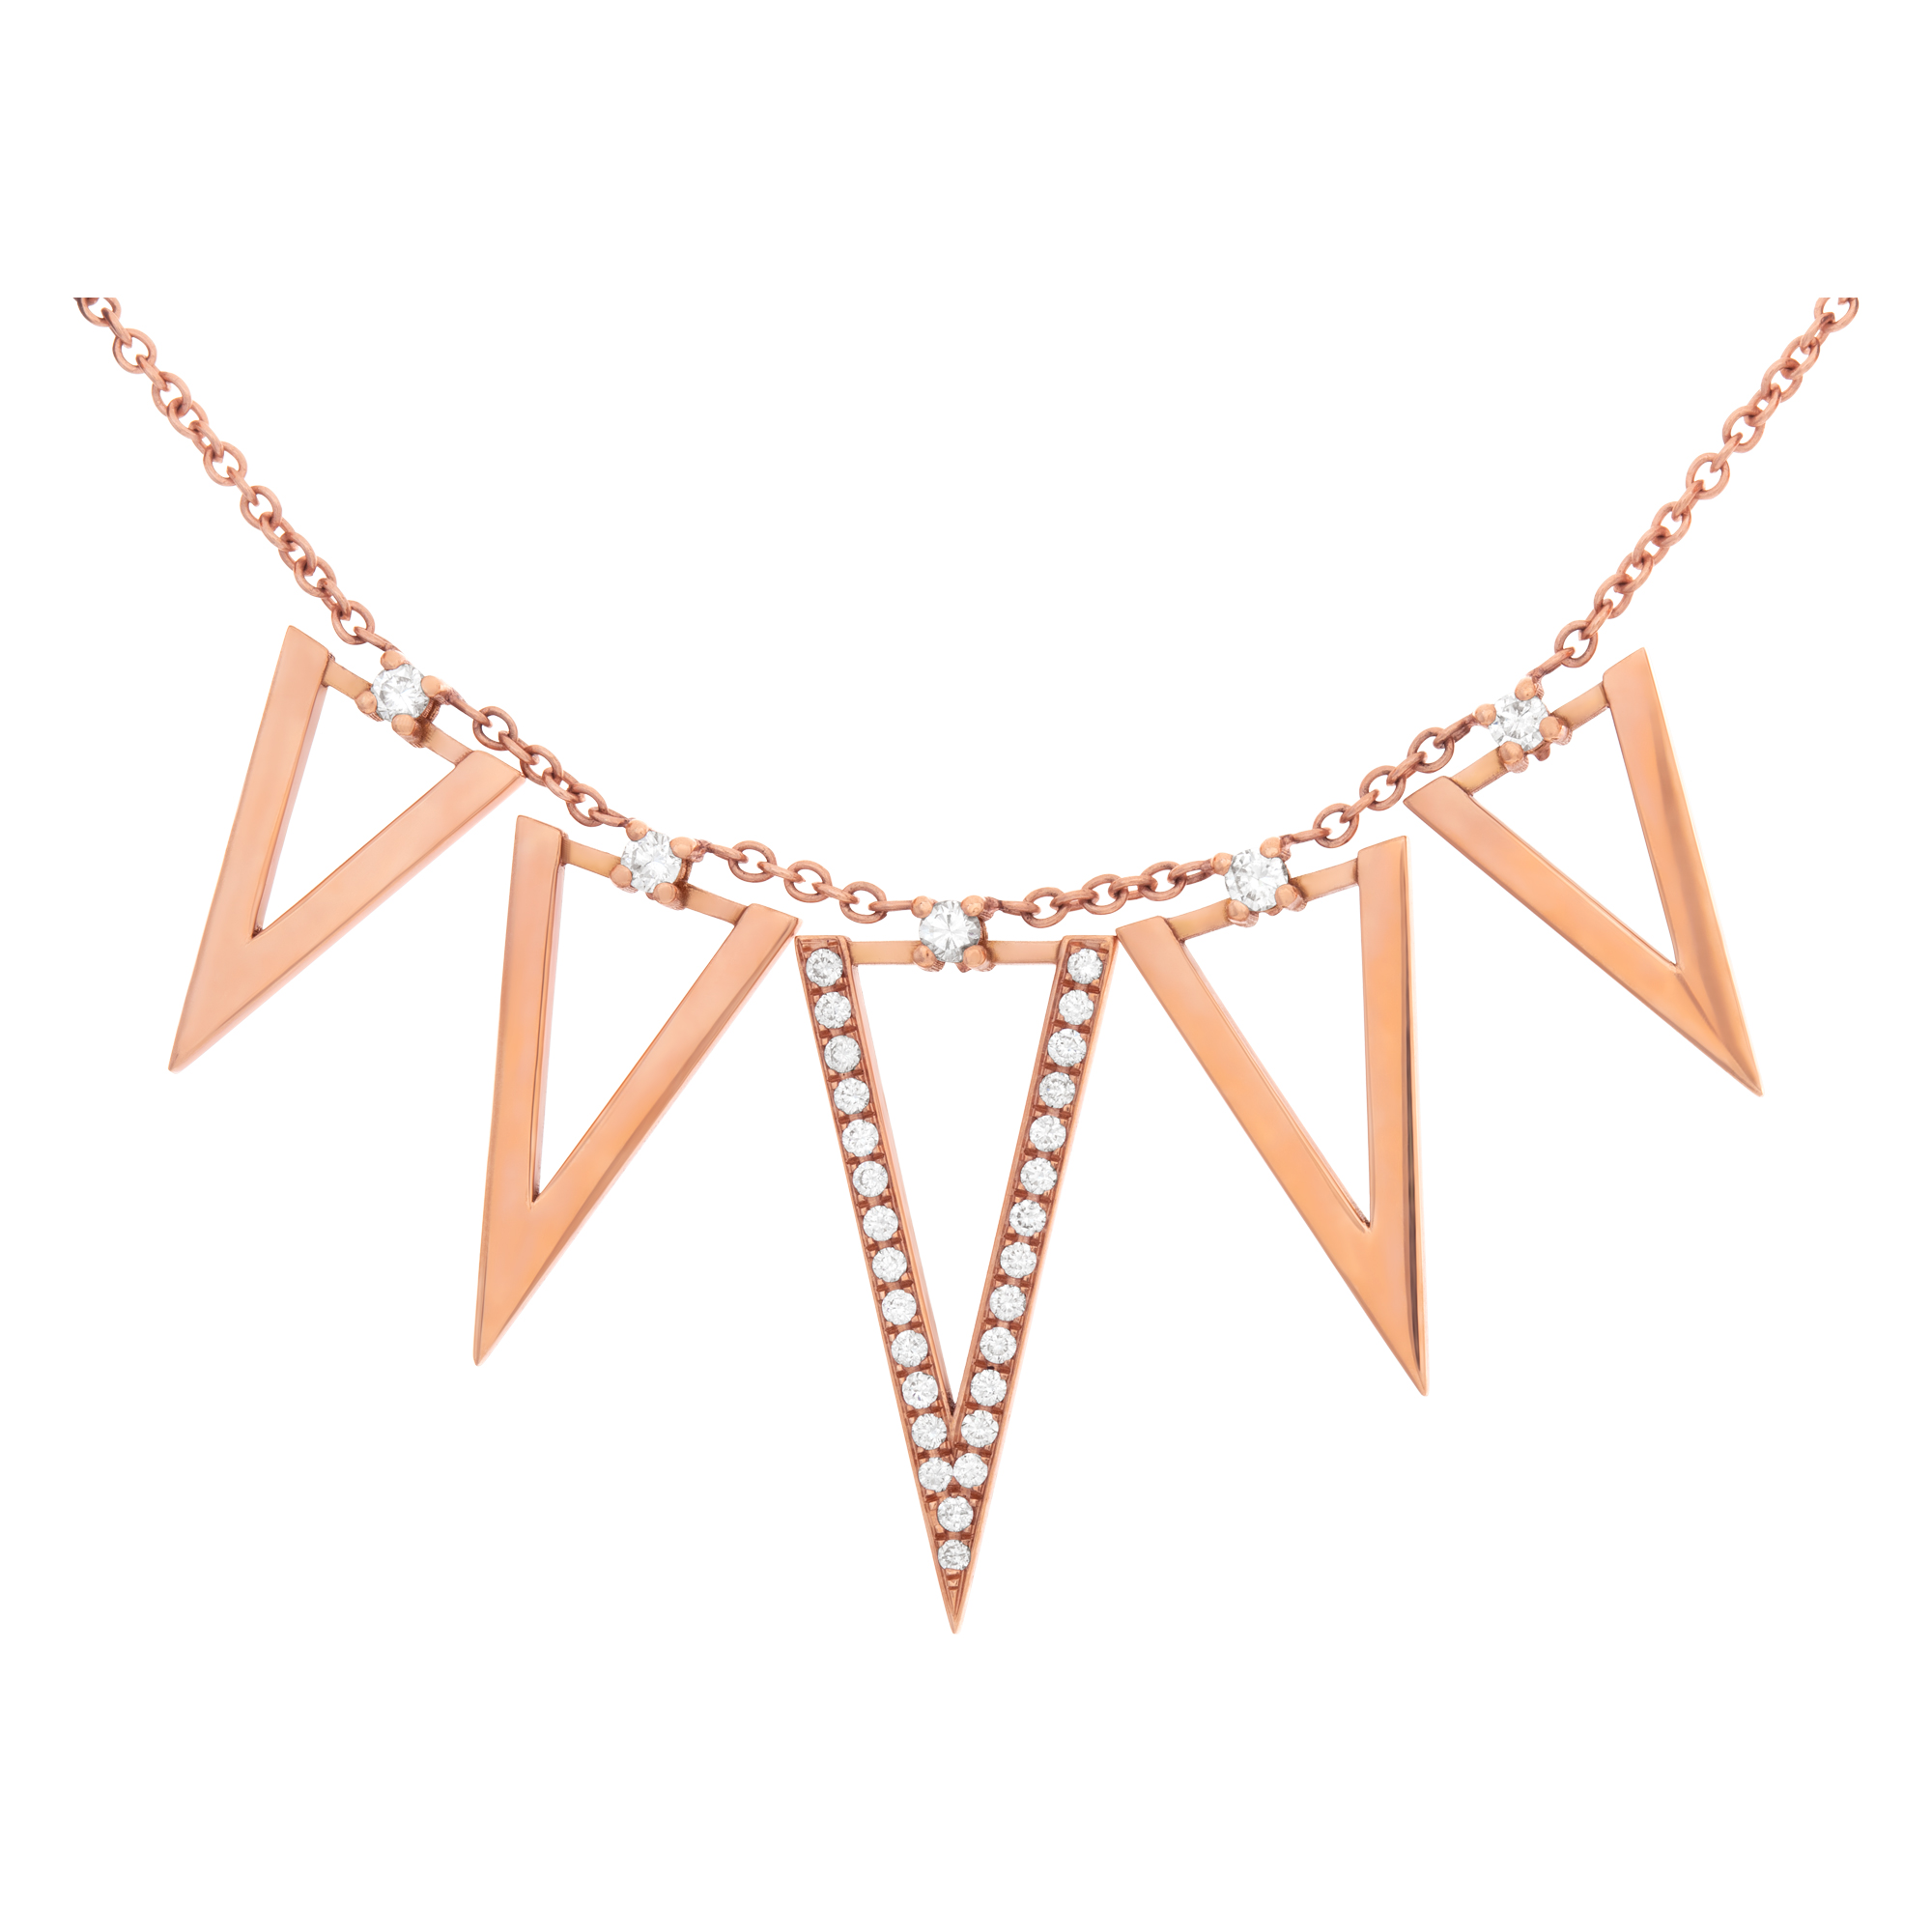 18k rose gold necklace with lovely & contemporary triangular pendants